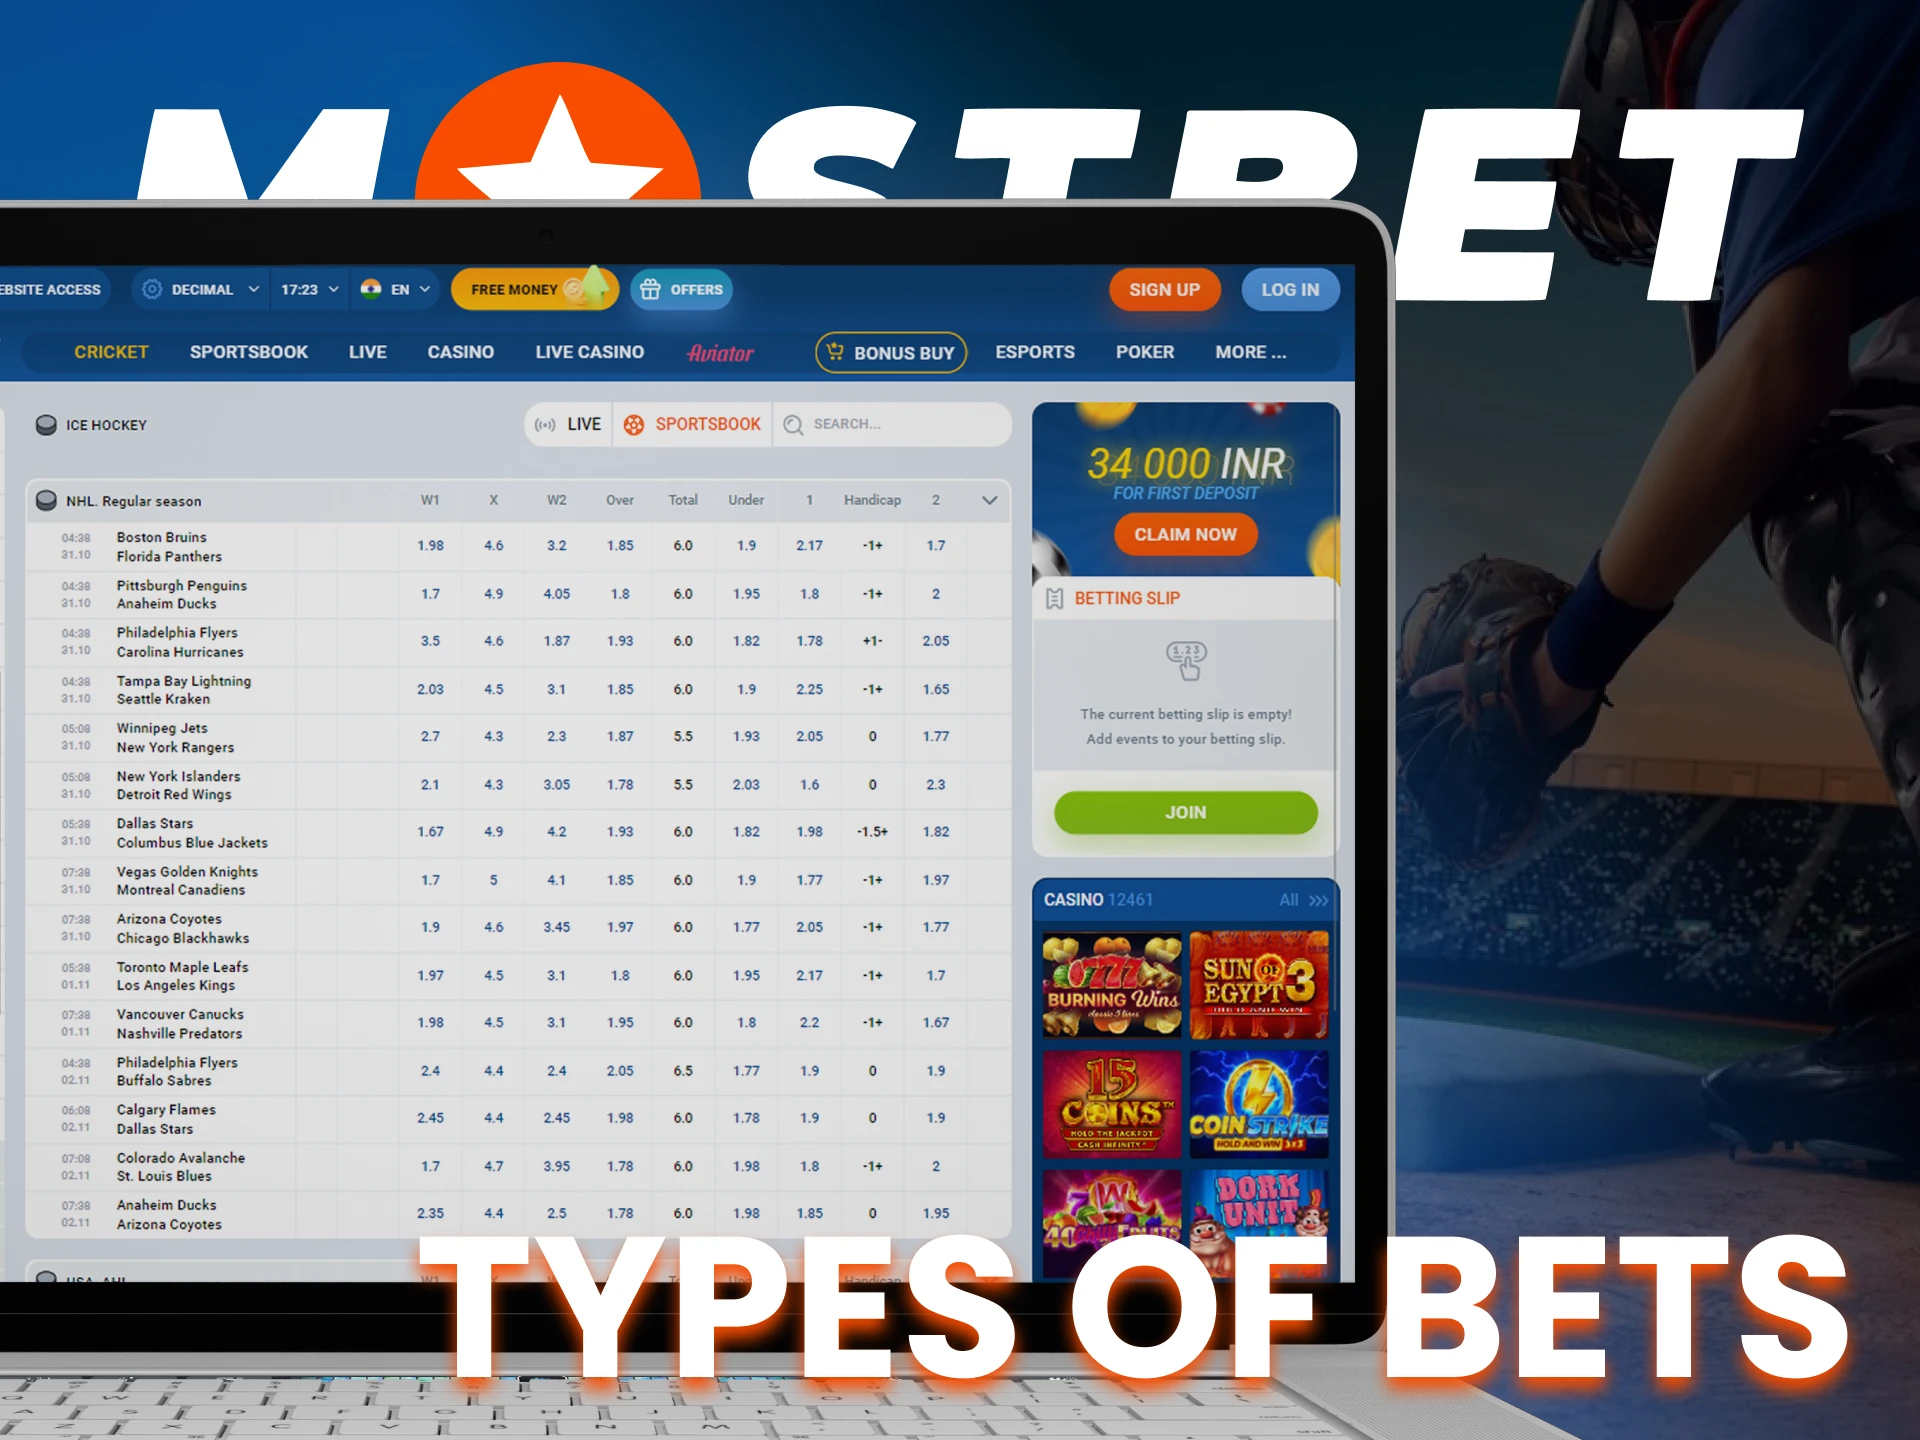 At Mostbet, try betting of different types.